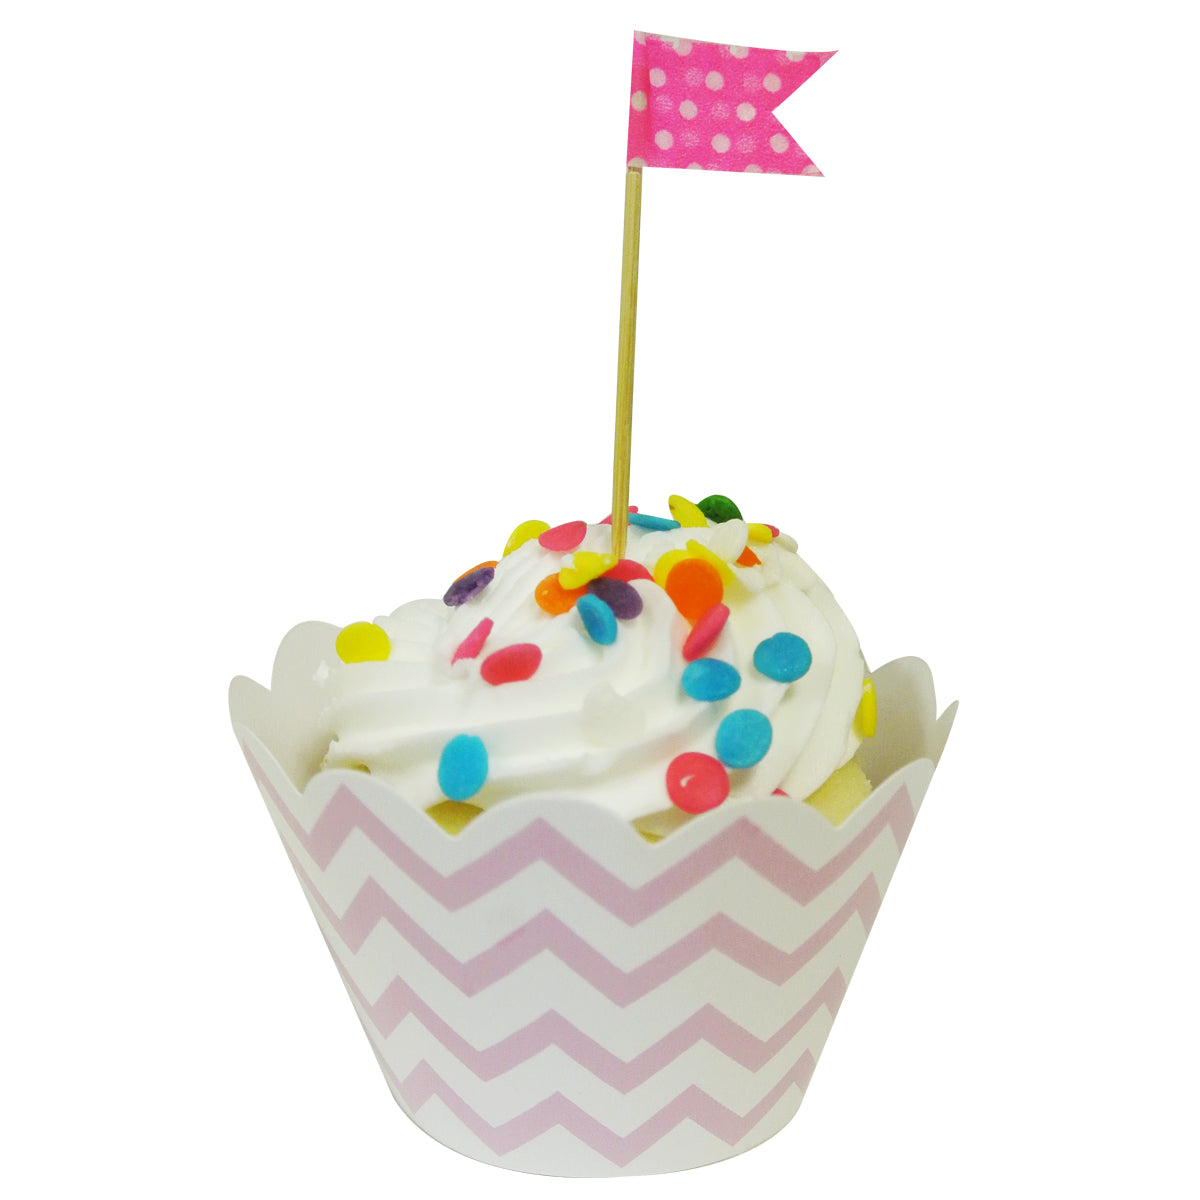 Wrapables Standard Size Chevron Cupcake Wrappers (Set of 20)